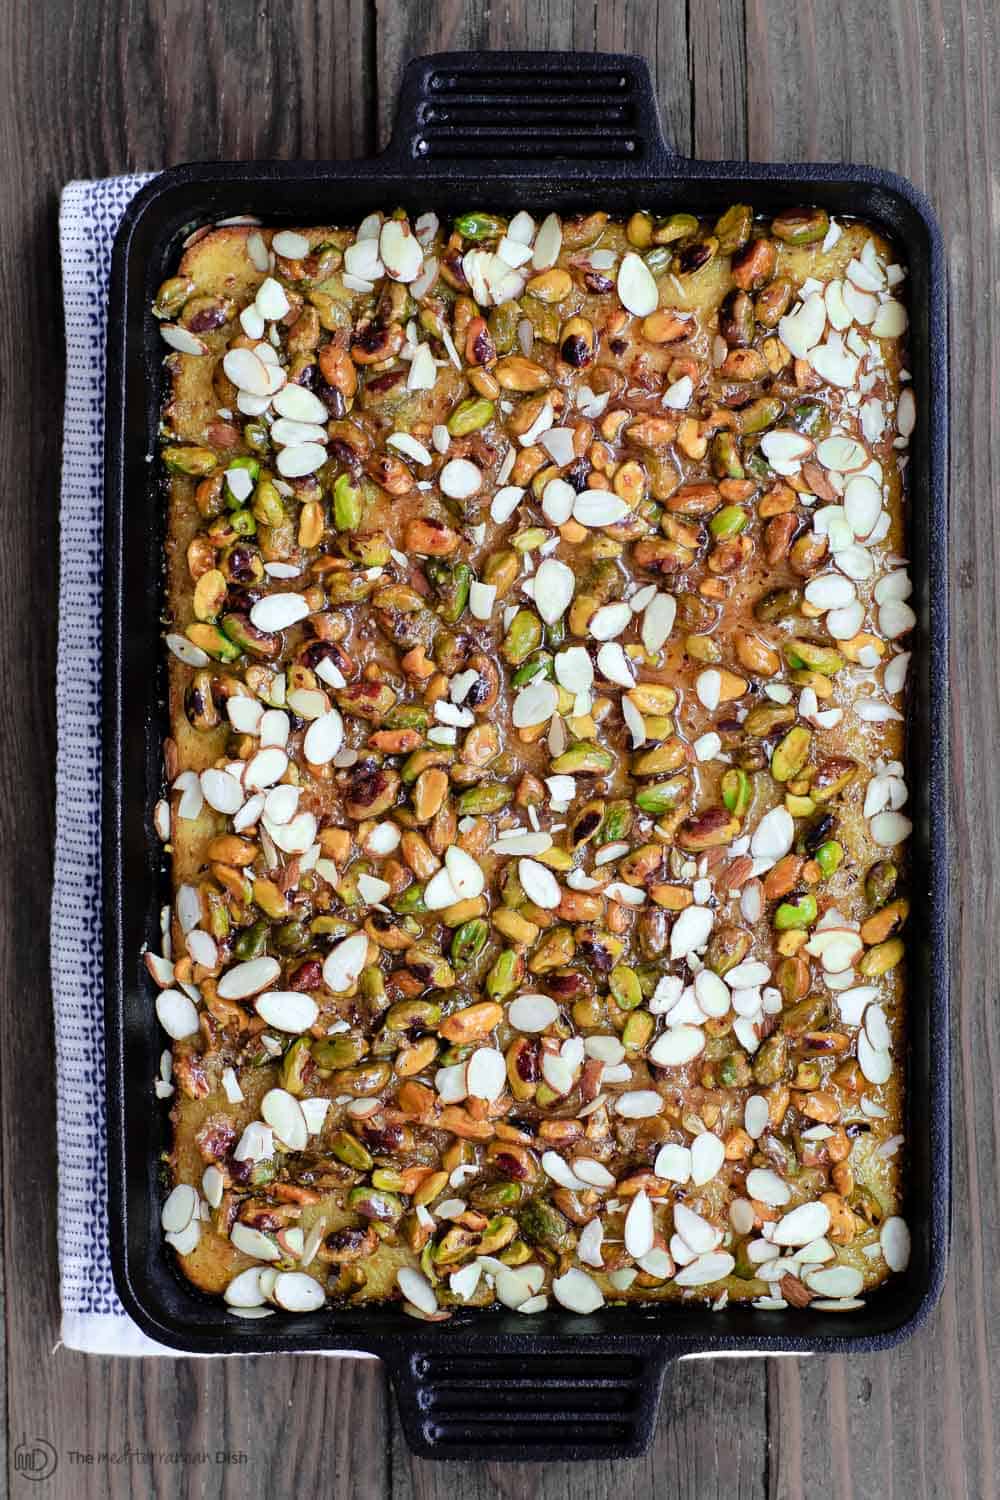 Entire Honey Cake in large pan. Topped with pistachios and slivered almonds